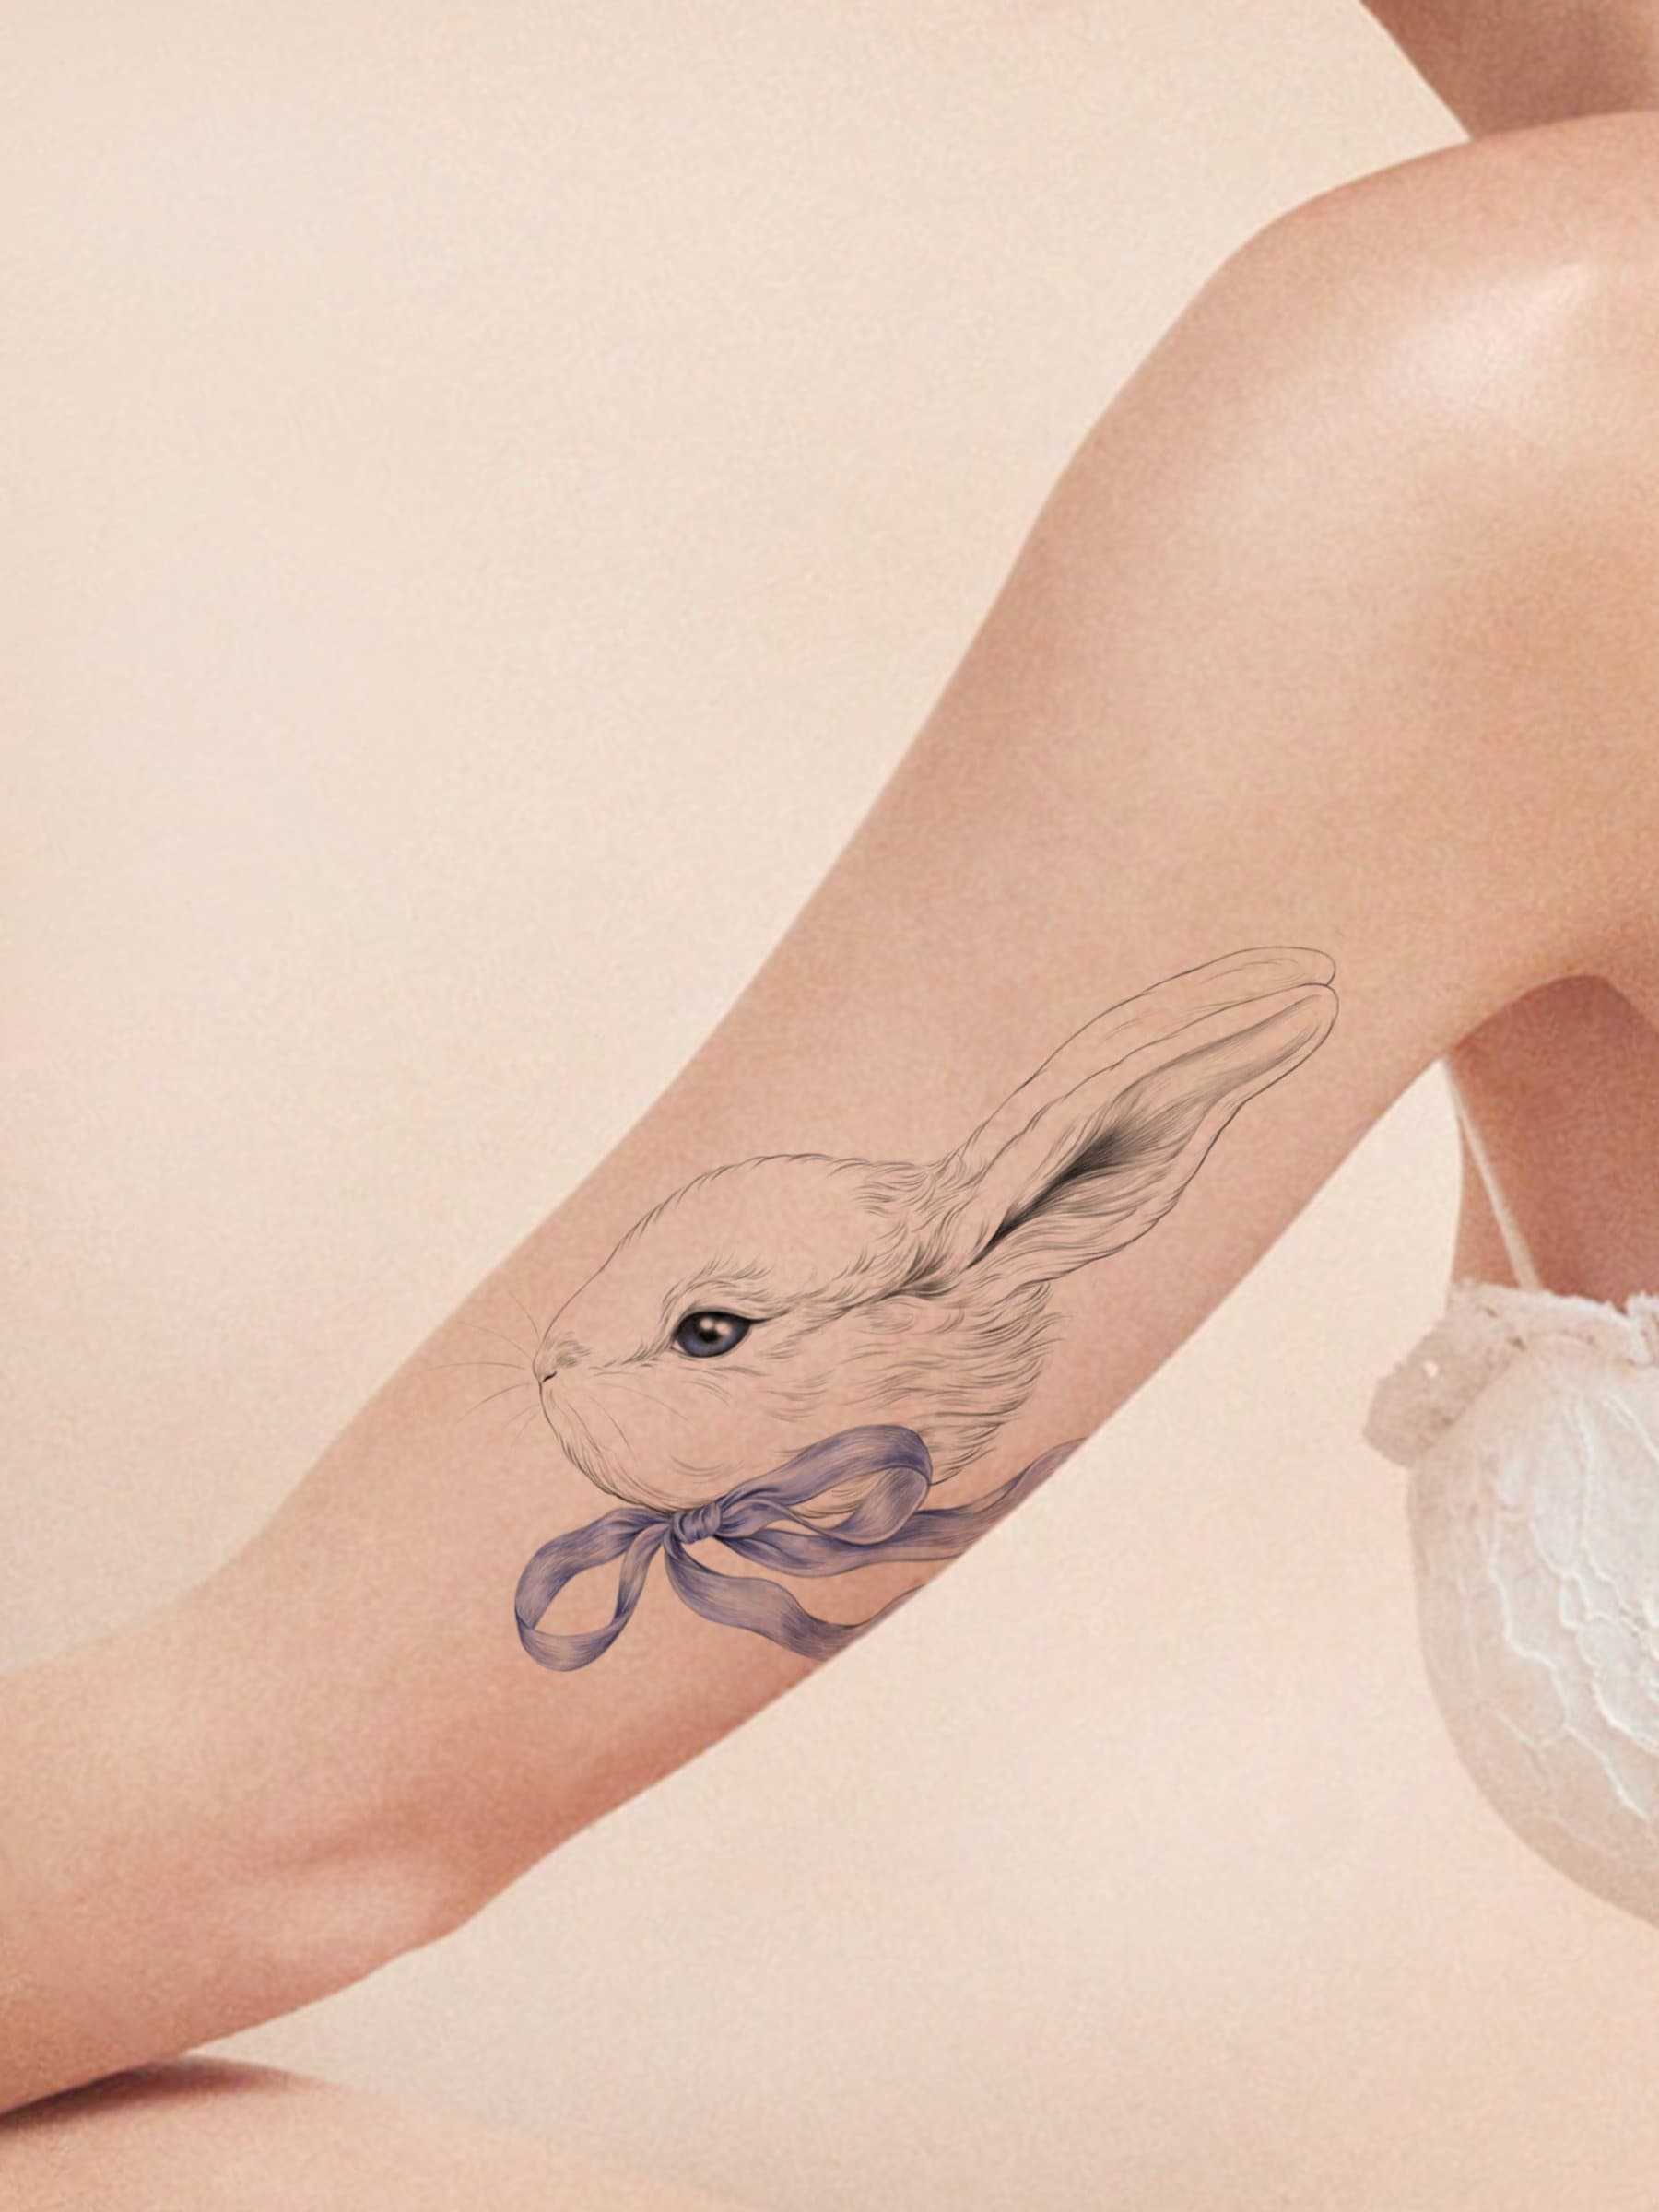 Micro-realistic rabbit tattoo located on the upper arm.